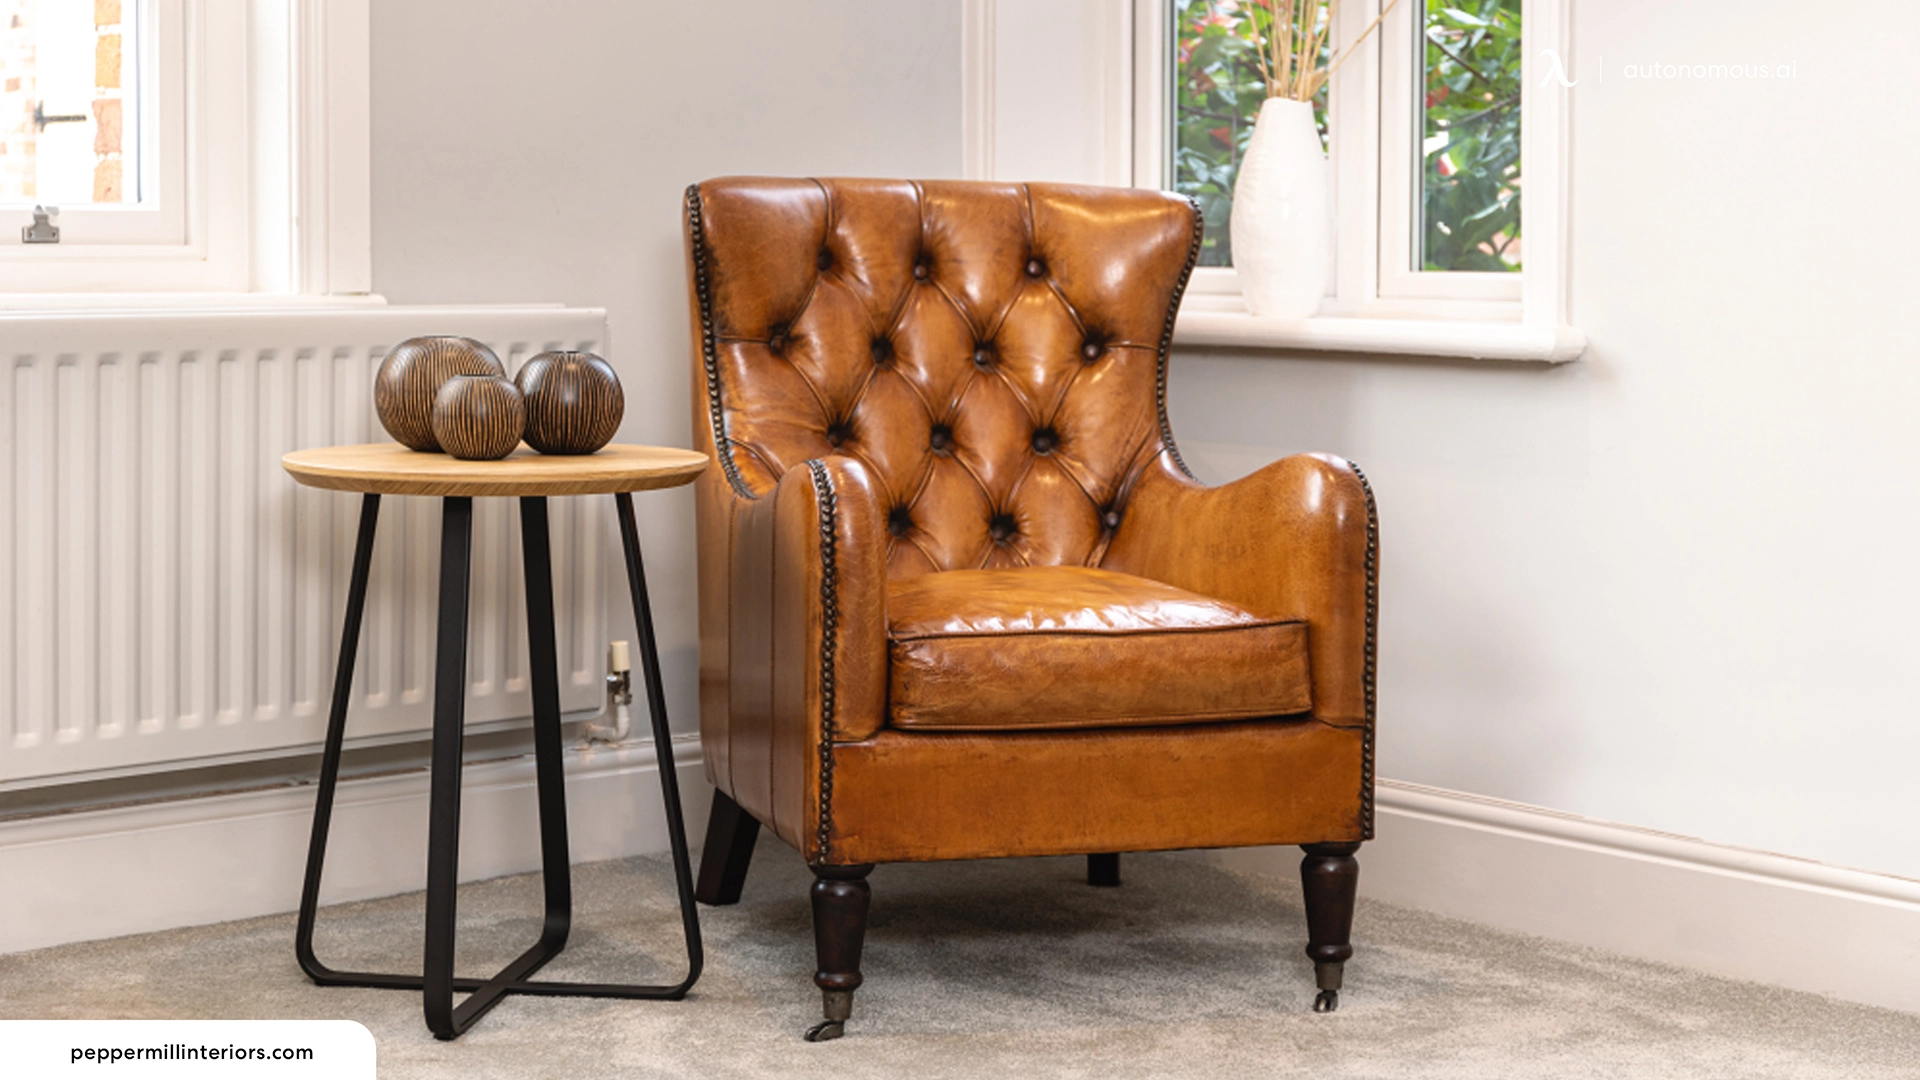 Chesterfield Chair - types of chairs